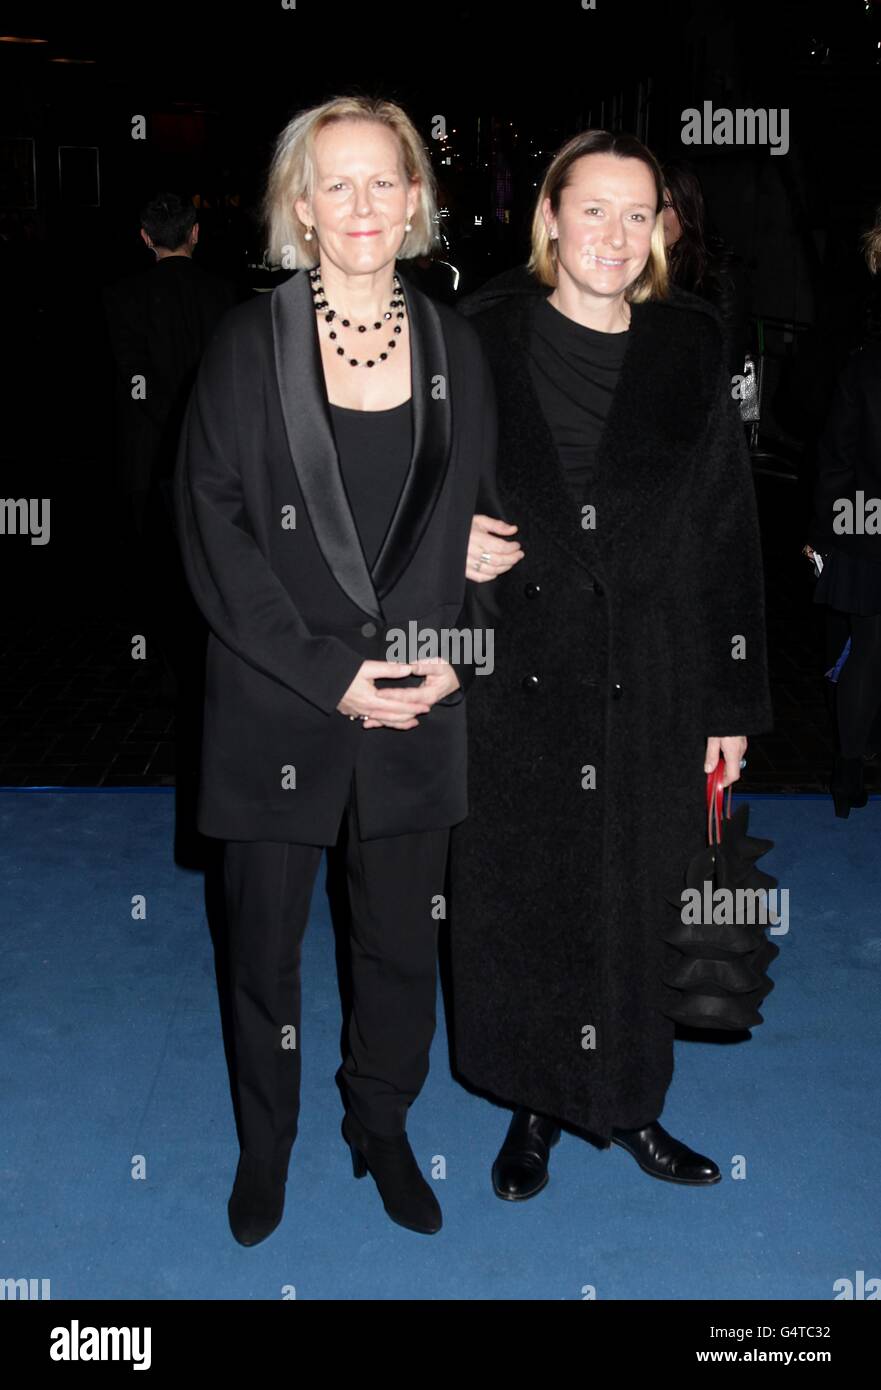 Phyllida Lloyd and Sarah Cooke (right) arriving at the European Premiere of The Iron Lady, at the BFI Southbank, Belvedere Road, London. Stock Photo